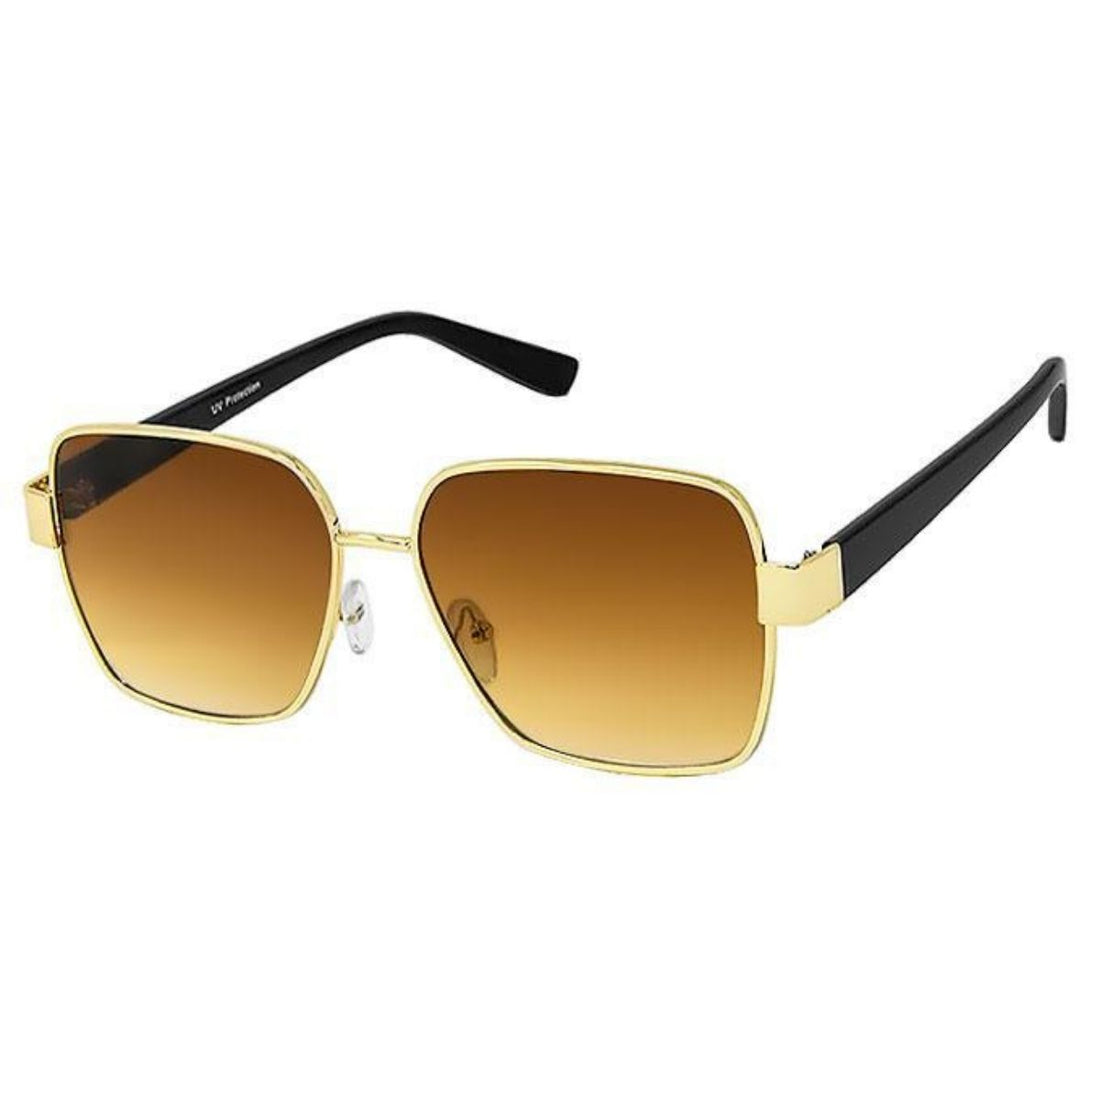 Brown Lens Gold Wire Frame Sunglasses